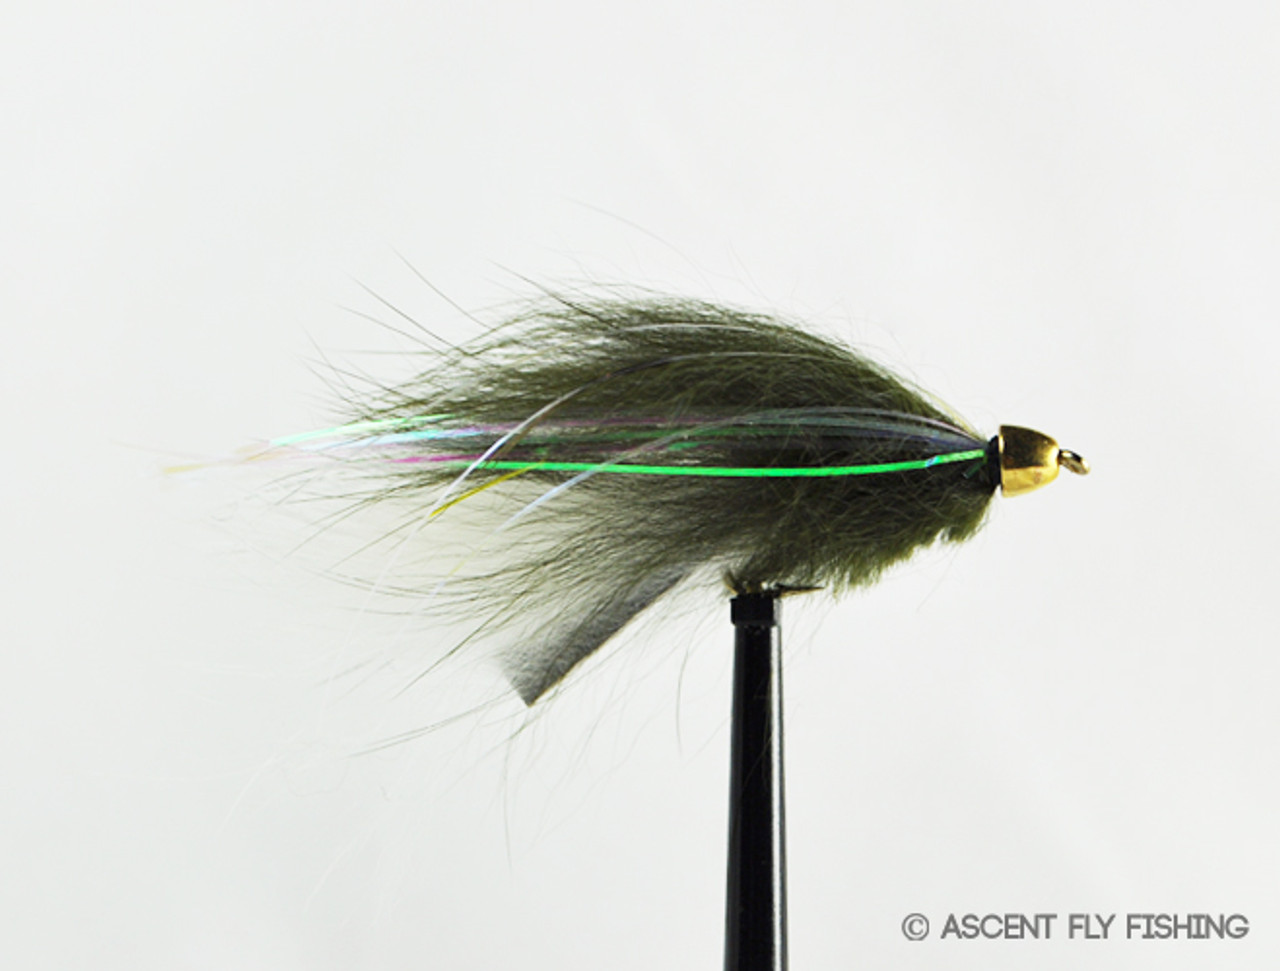 Conehead Little Rascal - Ascent Fly Fishing